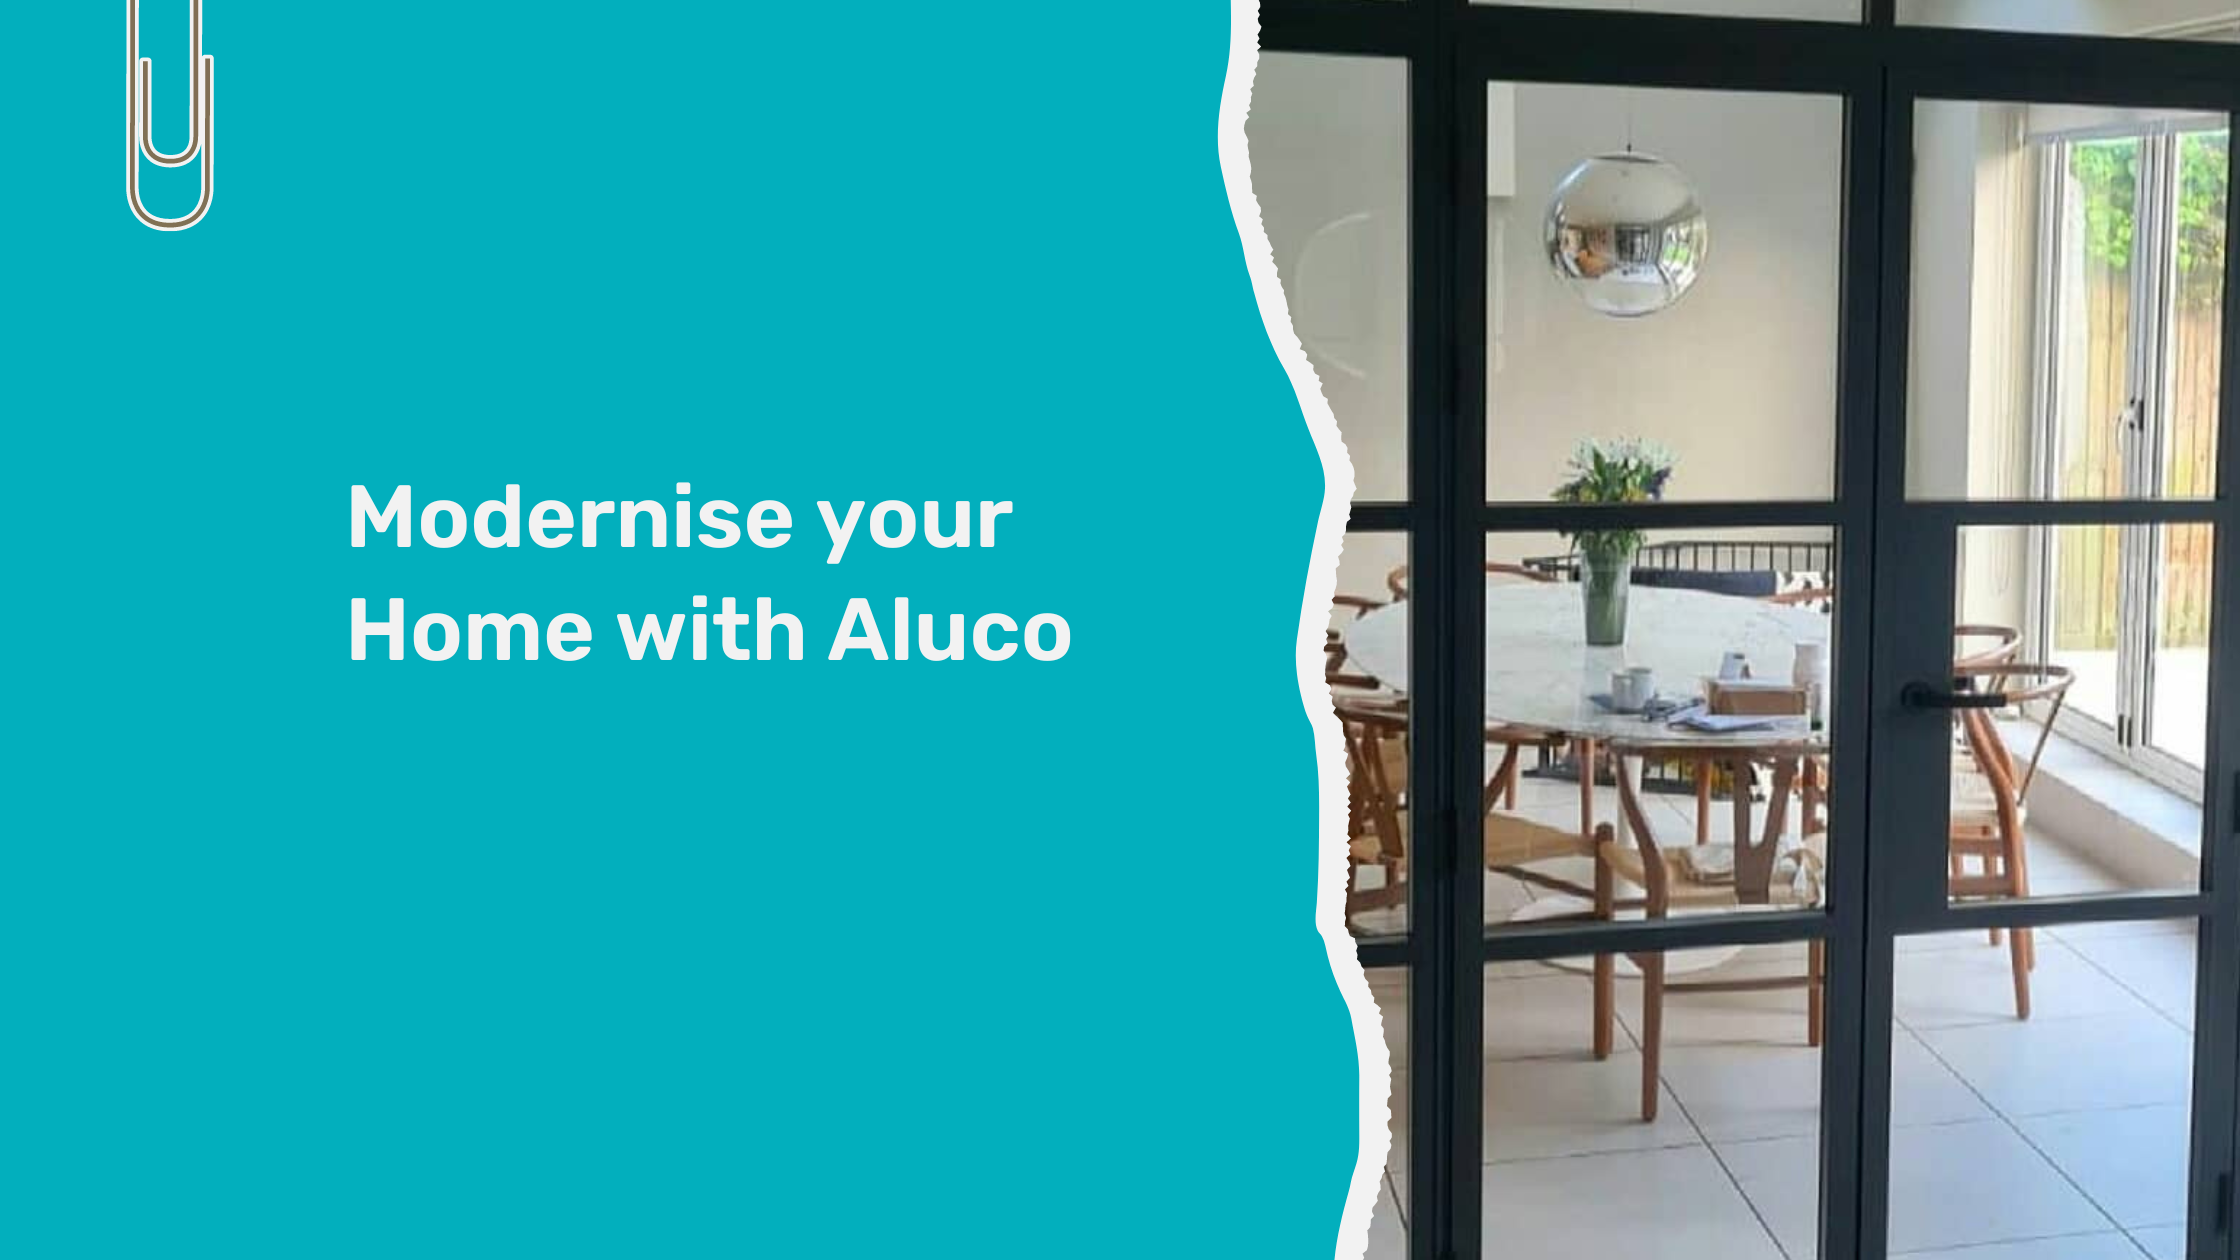 Modernise your home with Aluco